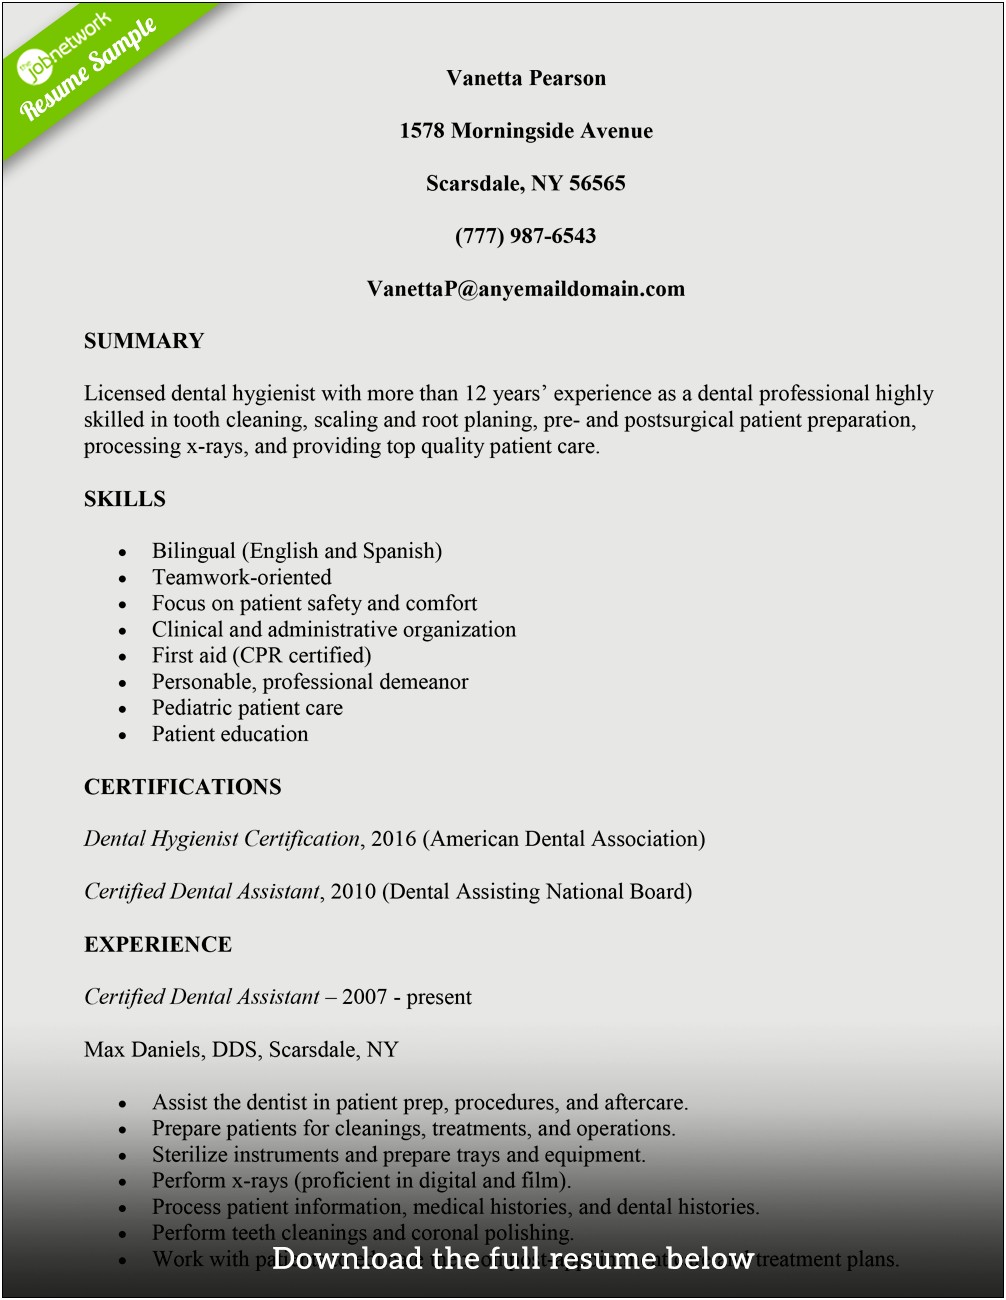 Dental Assistant Resume No Experience Reference